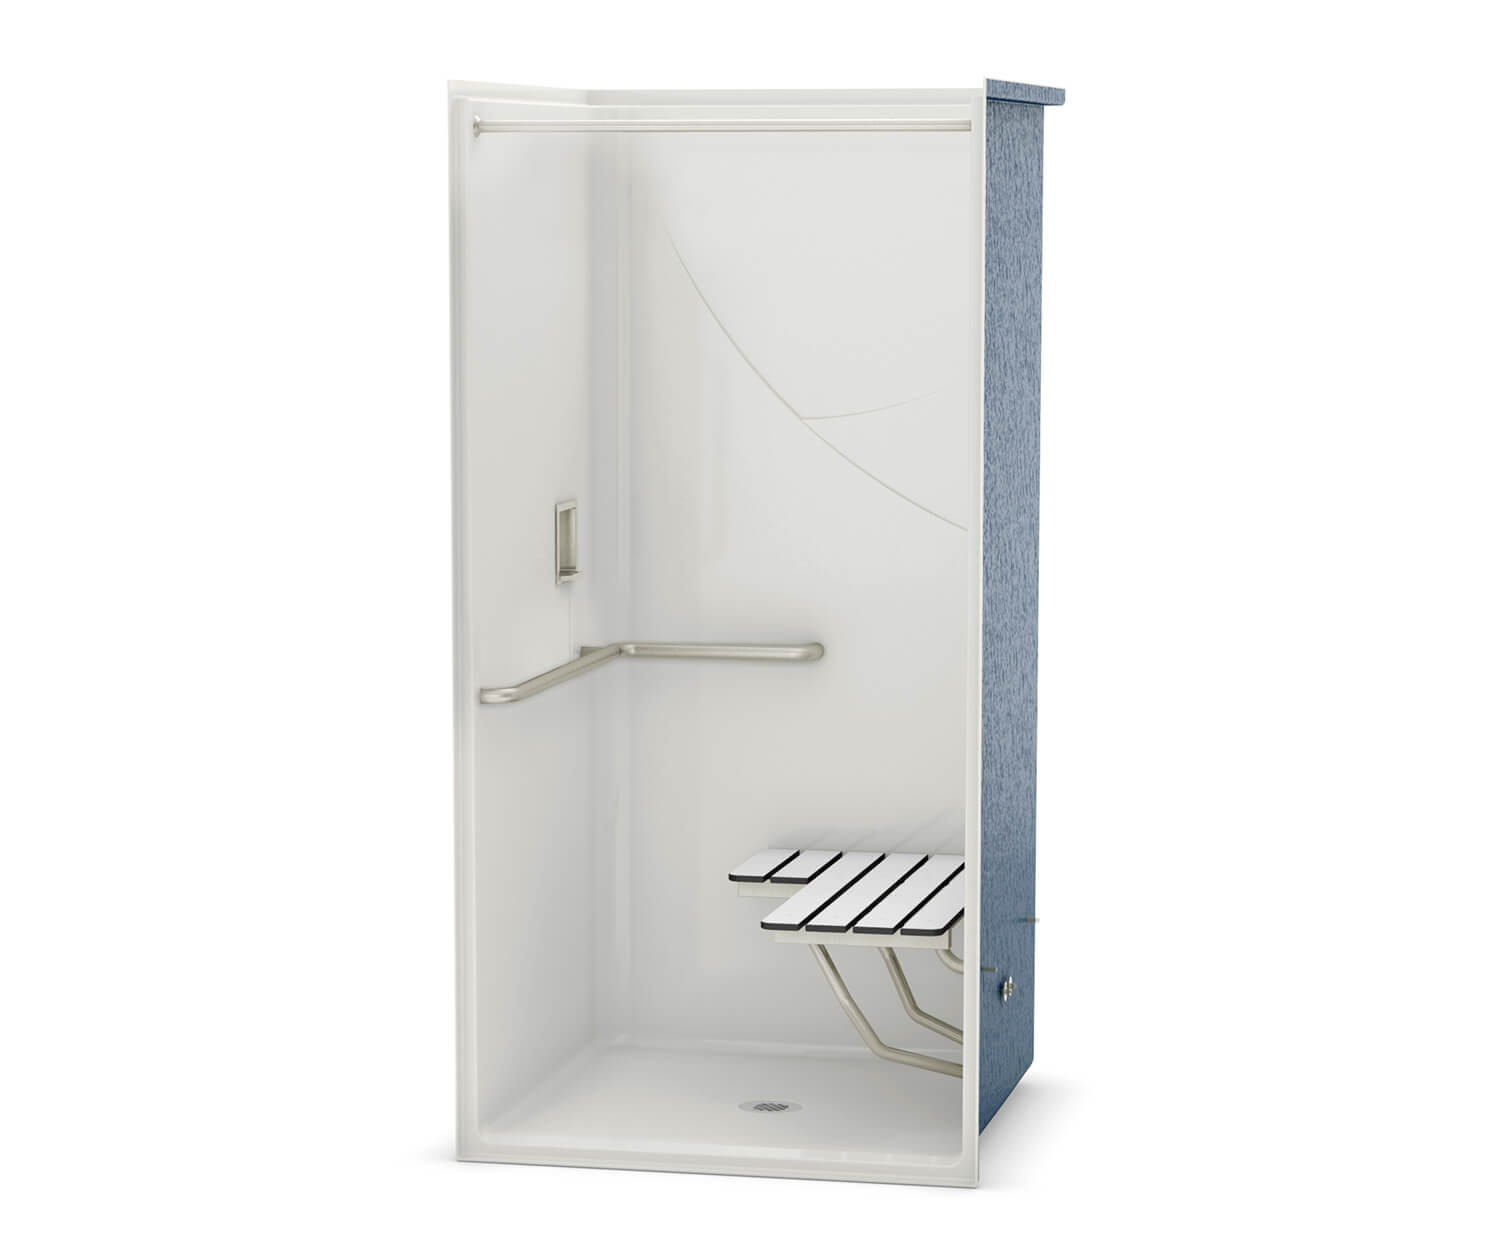 OPS-3636 AcrylX Alcove Center Drain One-Piece Shower in White - L 